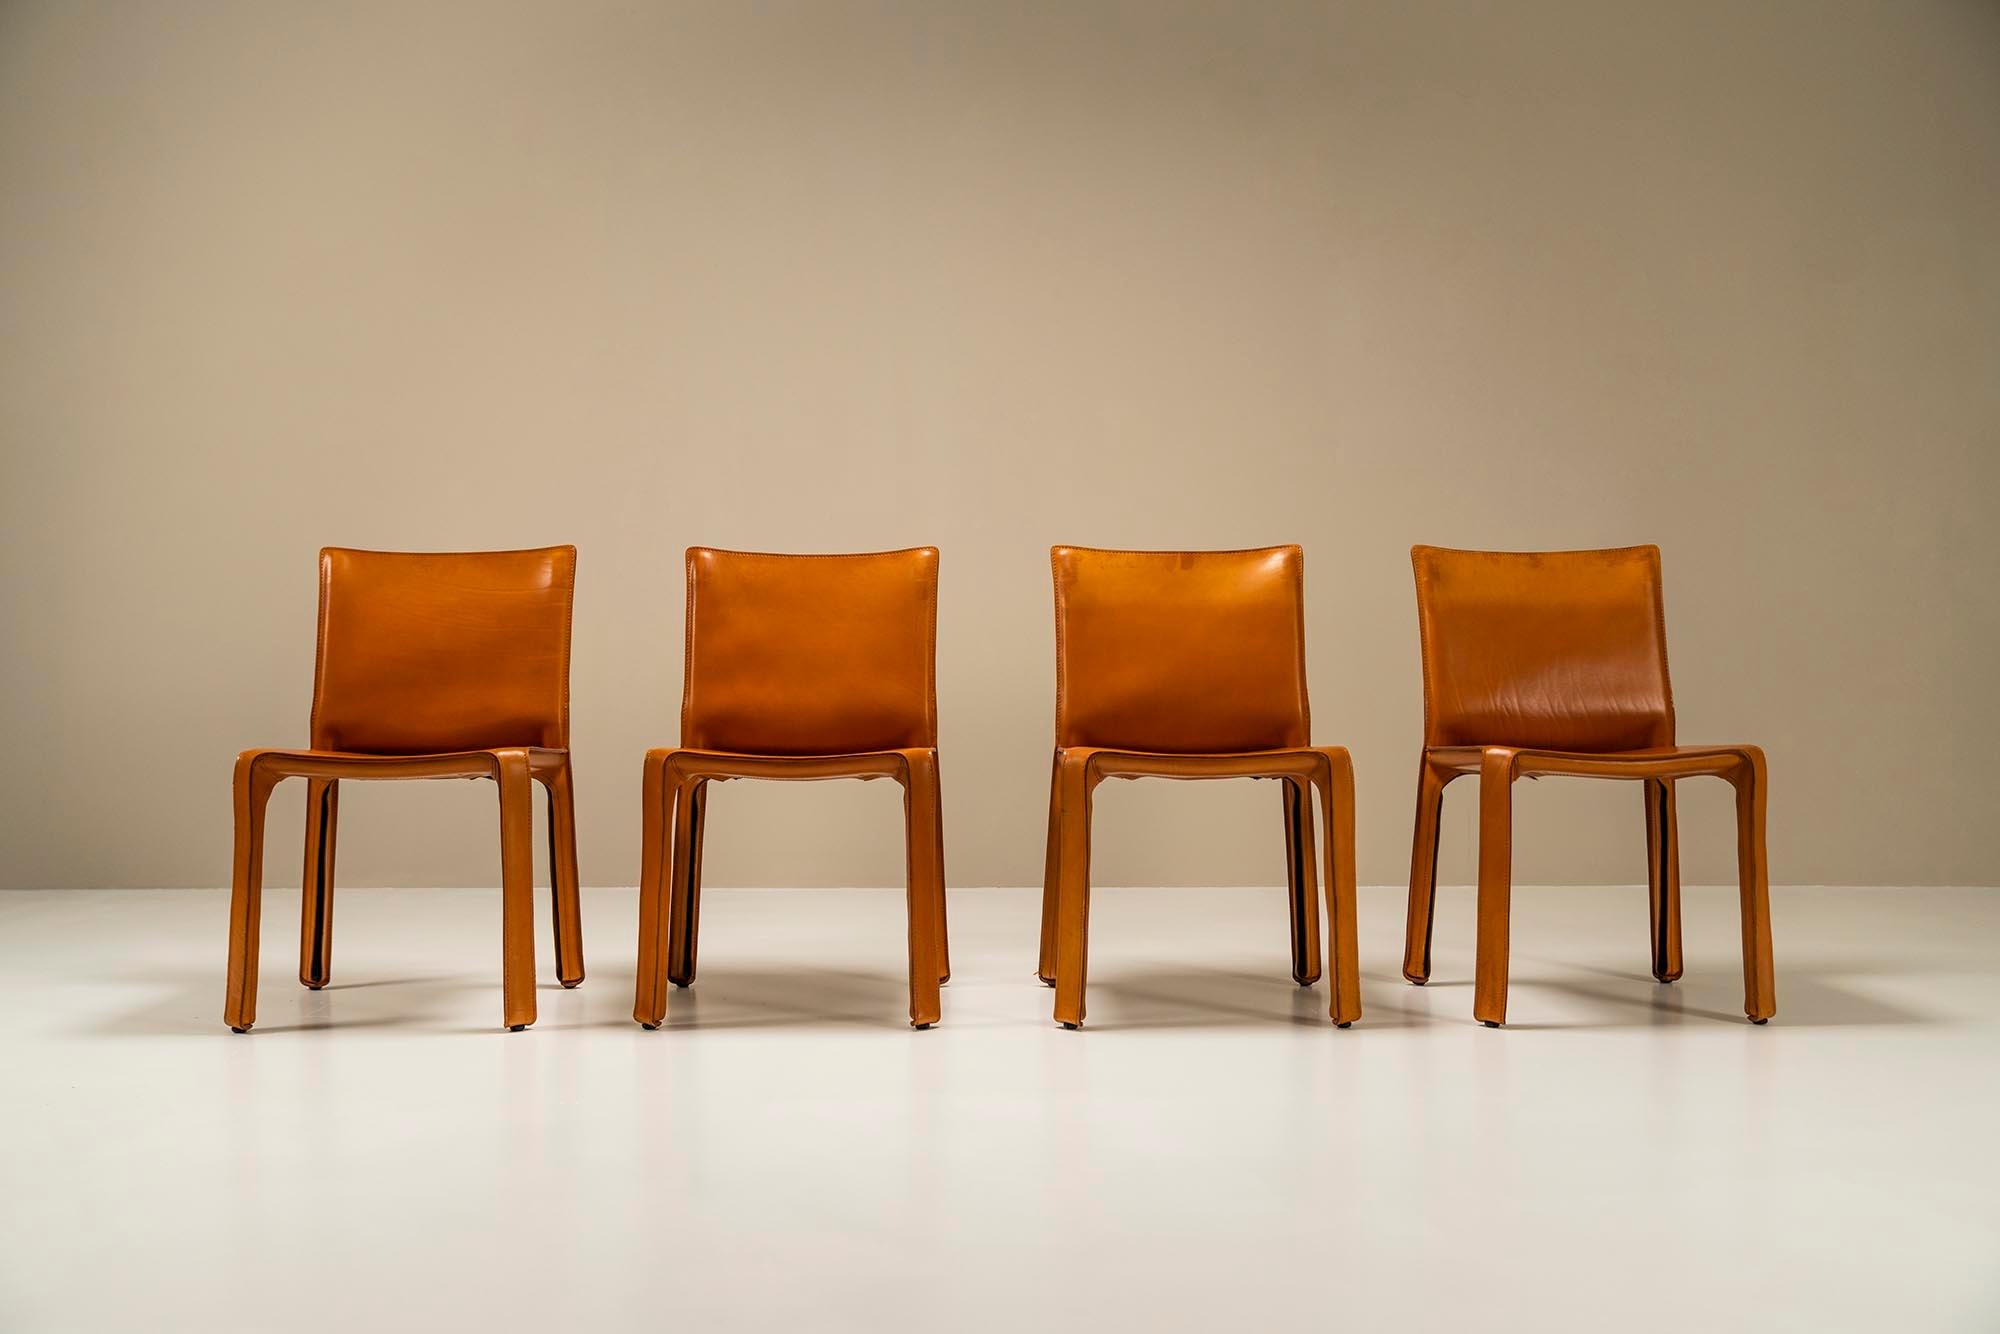 Of course, known for their presence in the MoMa in New York are these CAB chairs by the Italian architect and designer Mario Bellini. Its design communicates an exercise in simplicity, craftsmanship, and beauty. The cognac-colored saddle leather has